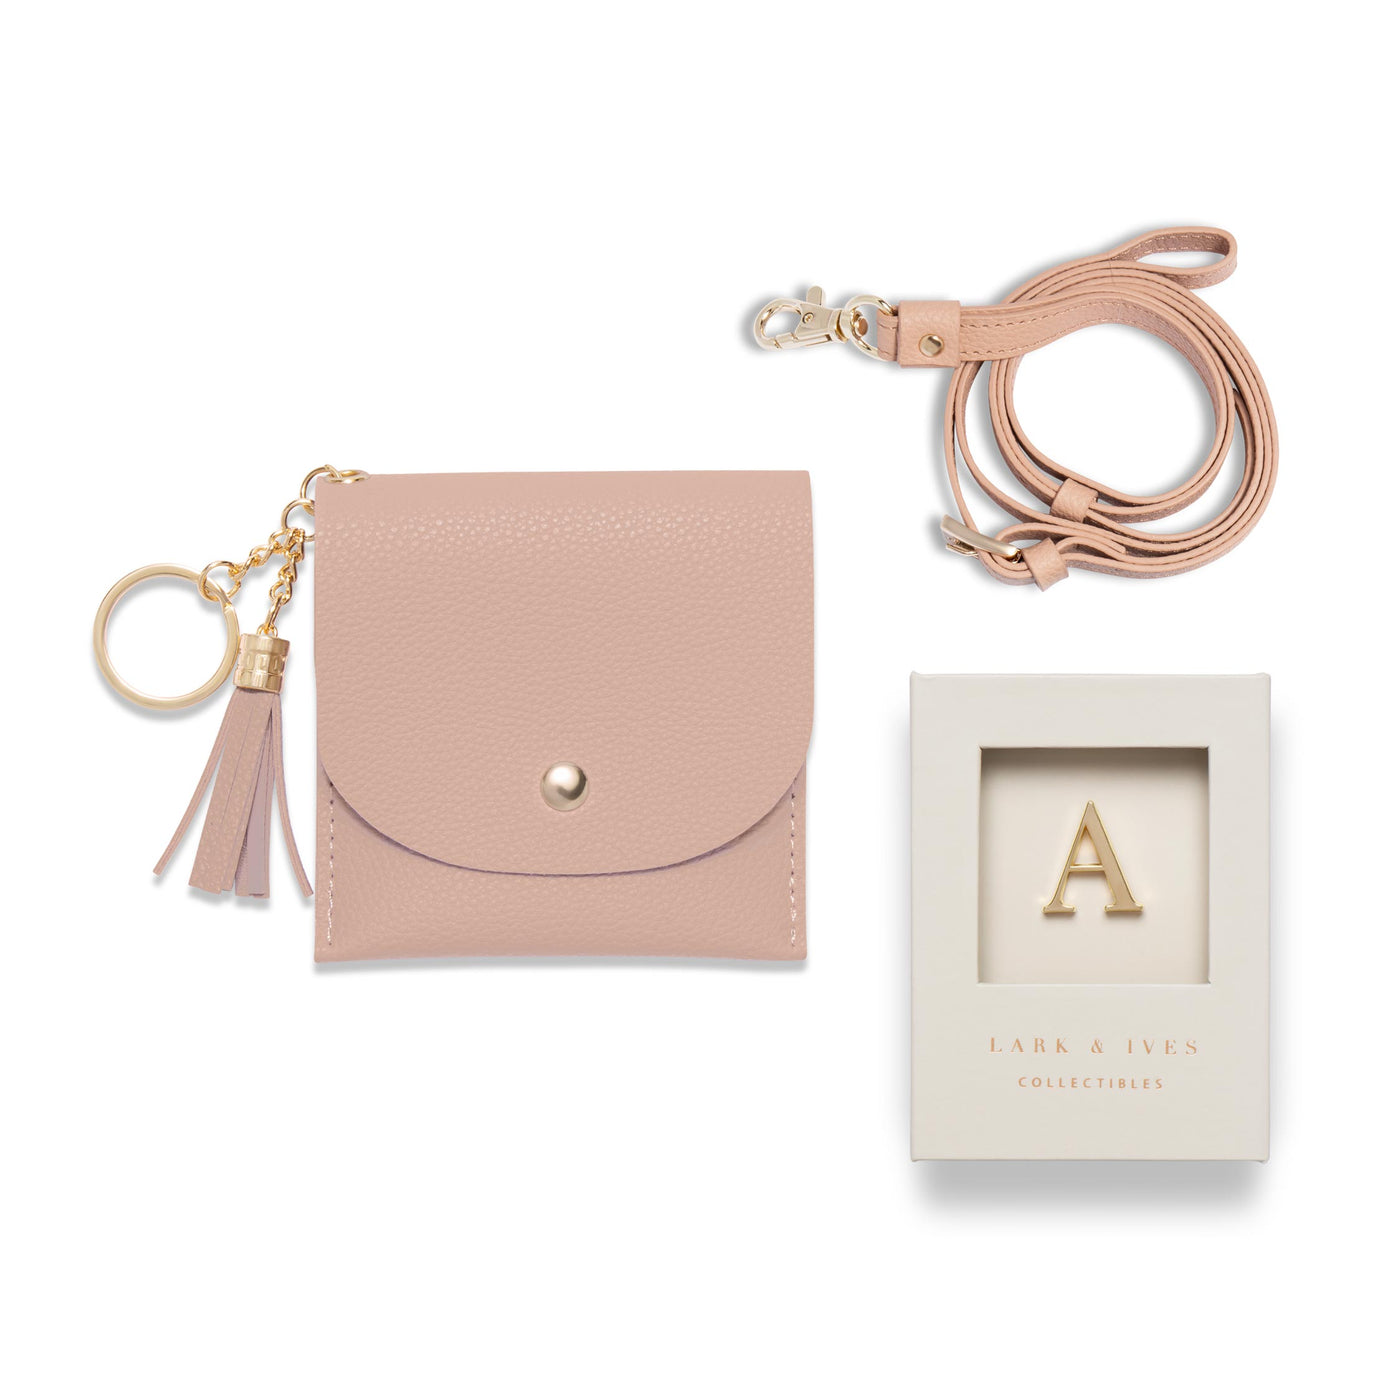 Lark and Ives / Vegan Leather Accessories / Small Accessories / Wallet / Mini Wallet / Card Case / Card Holder / Button snap closure / Flap Wallet / Card Purse with Gold Button and Keyring / Lanyard / Card Purse with Lanyard and Monogram Pin / Nude Pink